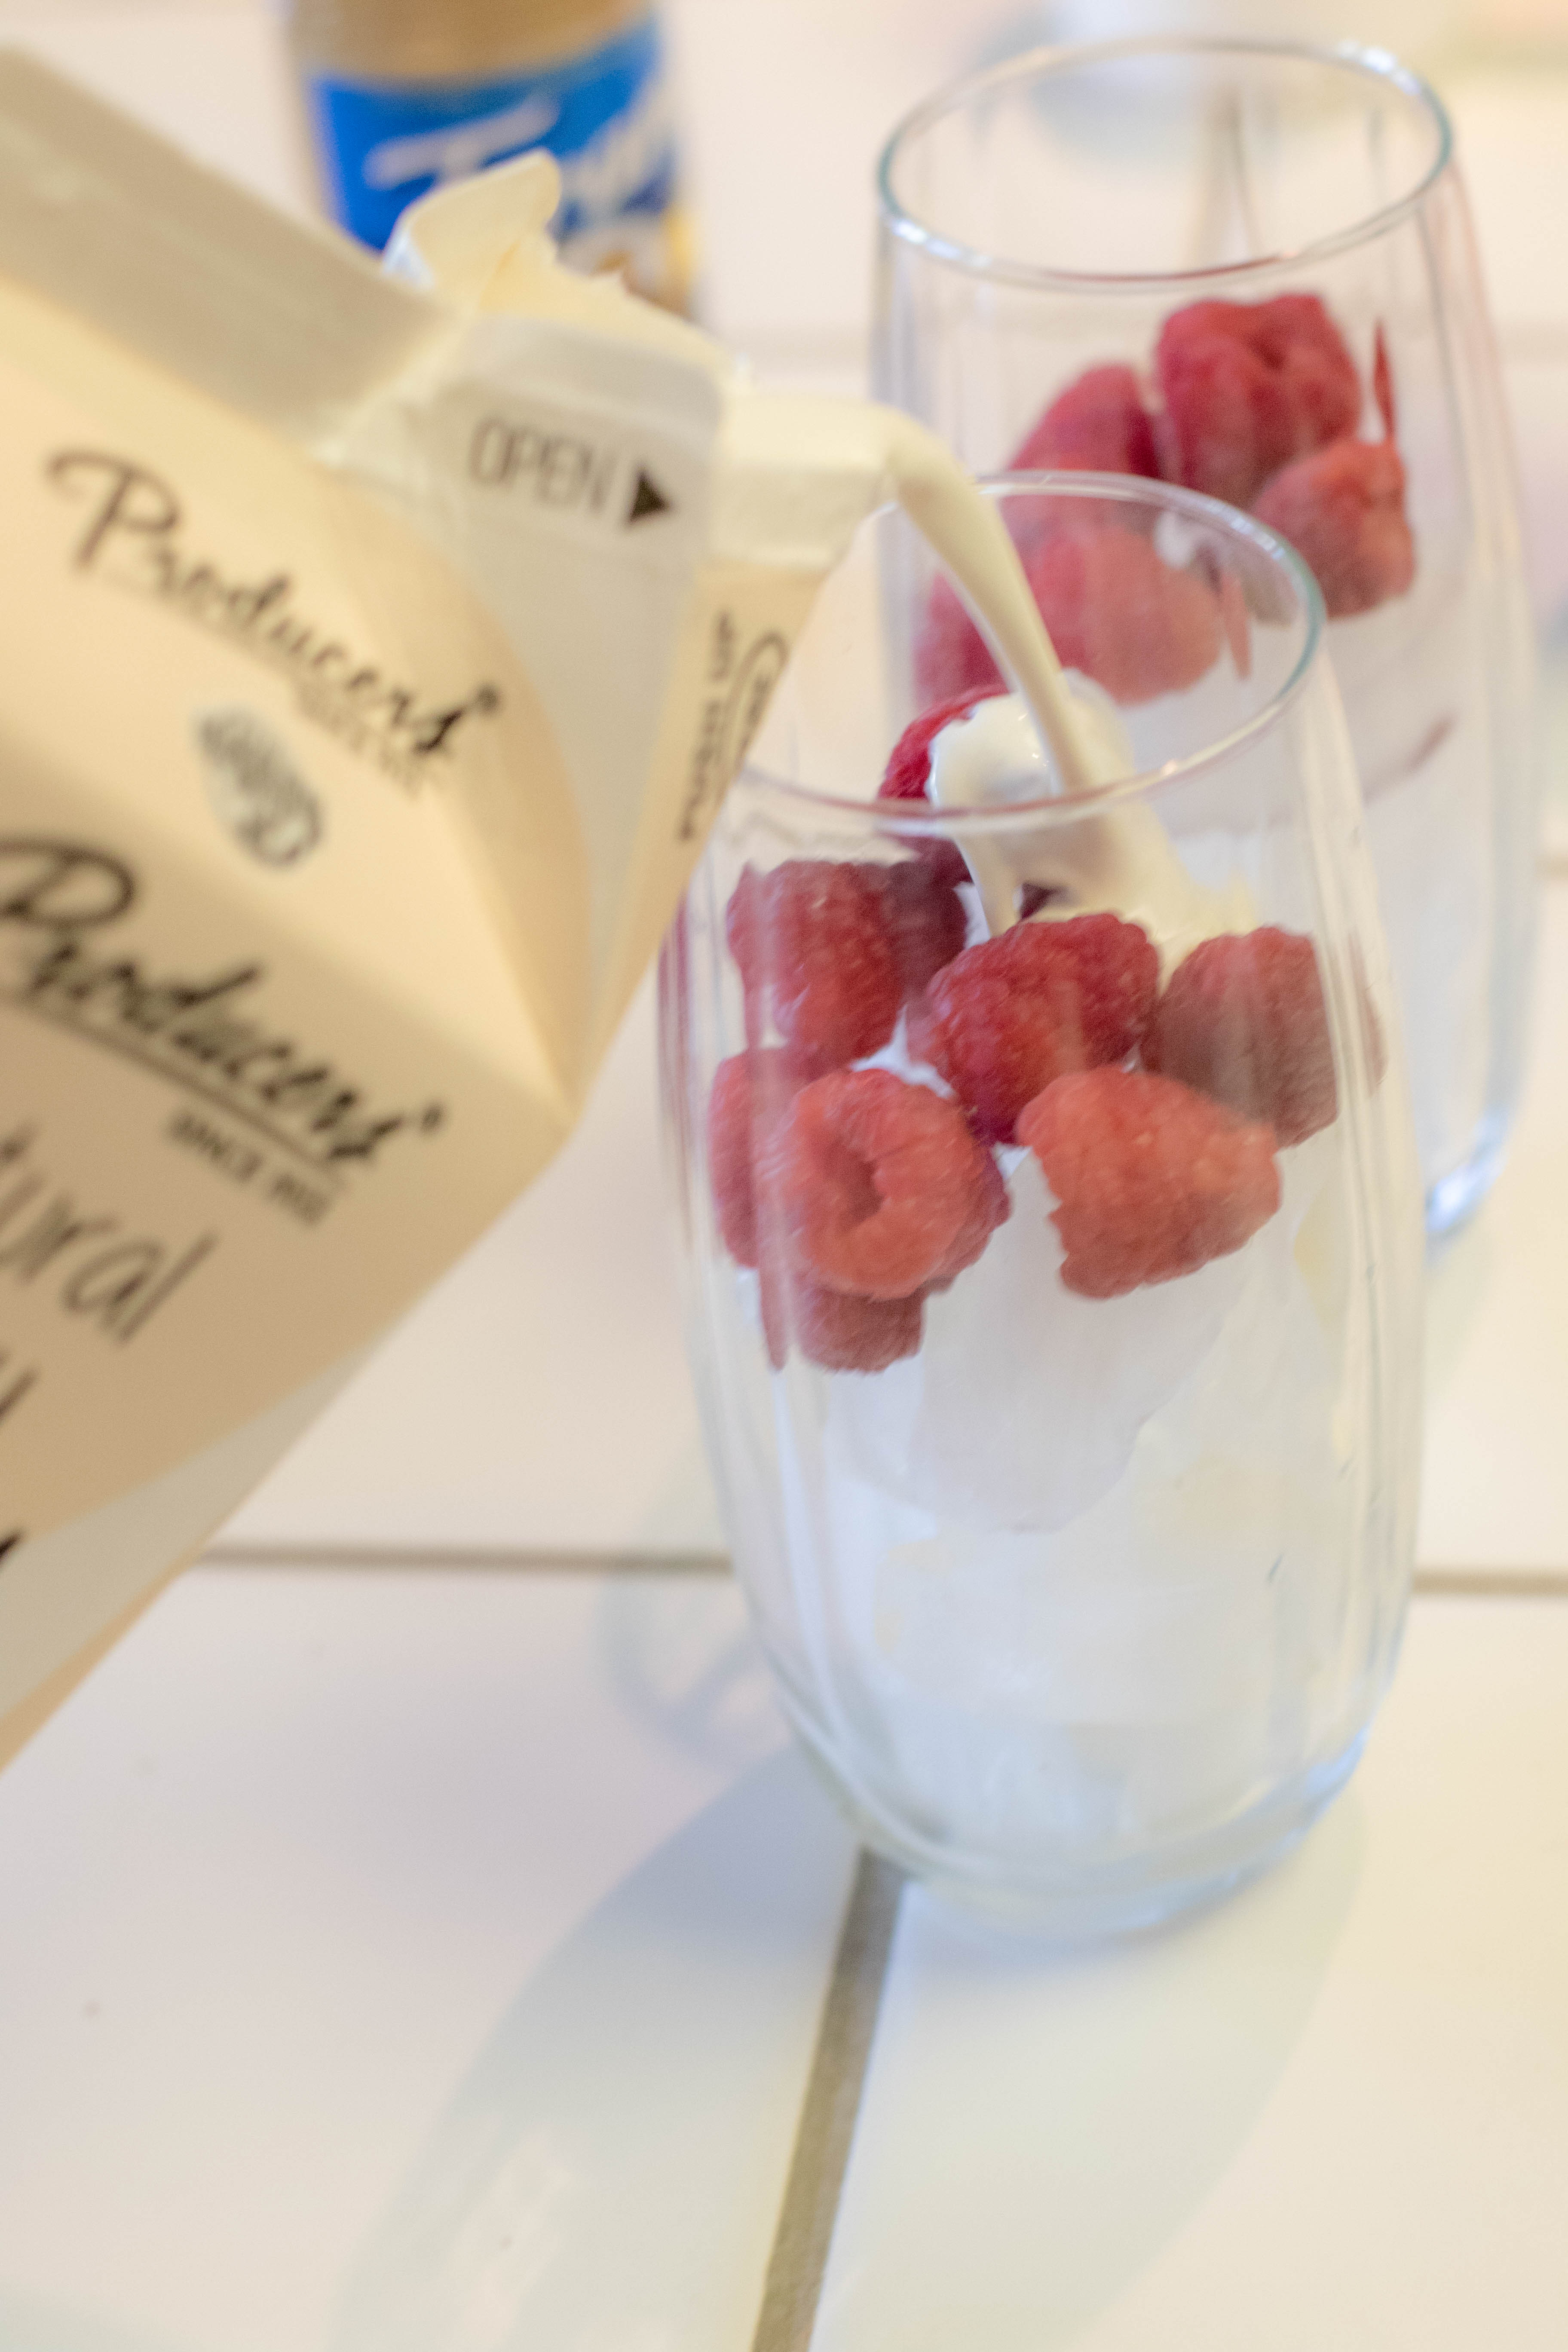 Natural Cream being poured into a clear glass with ice and raspberries on a kitchen counter.